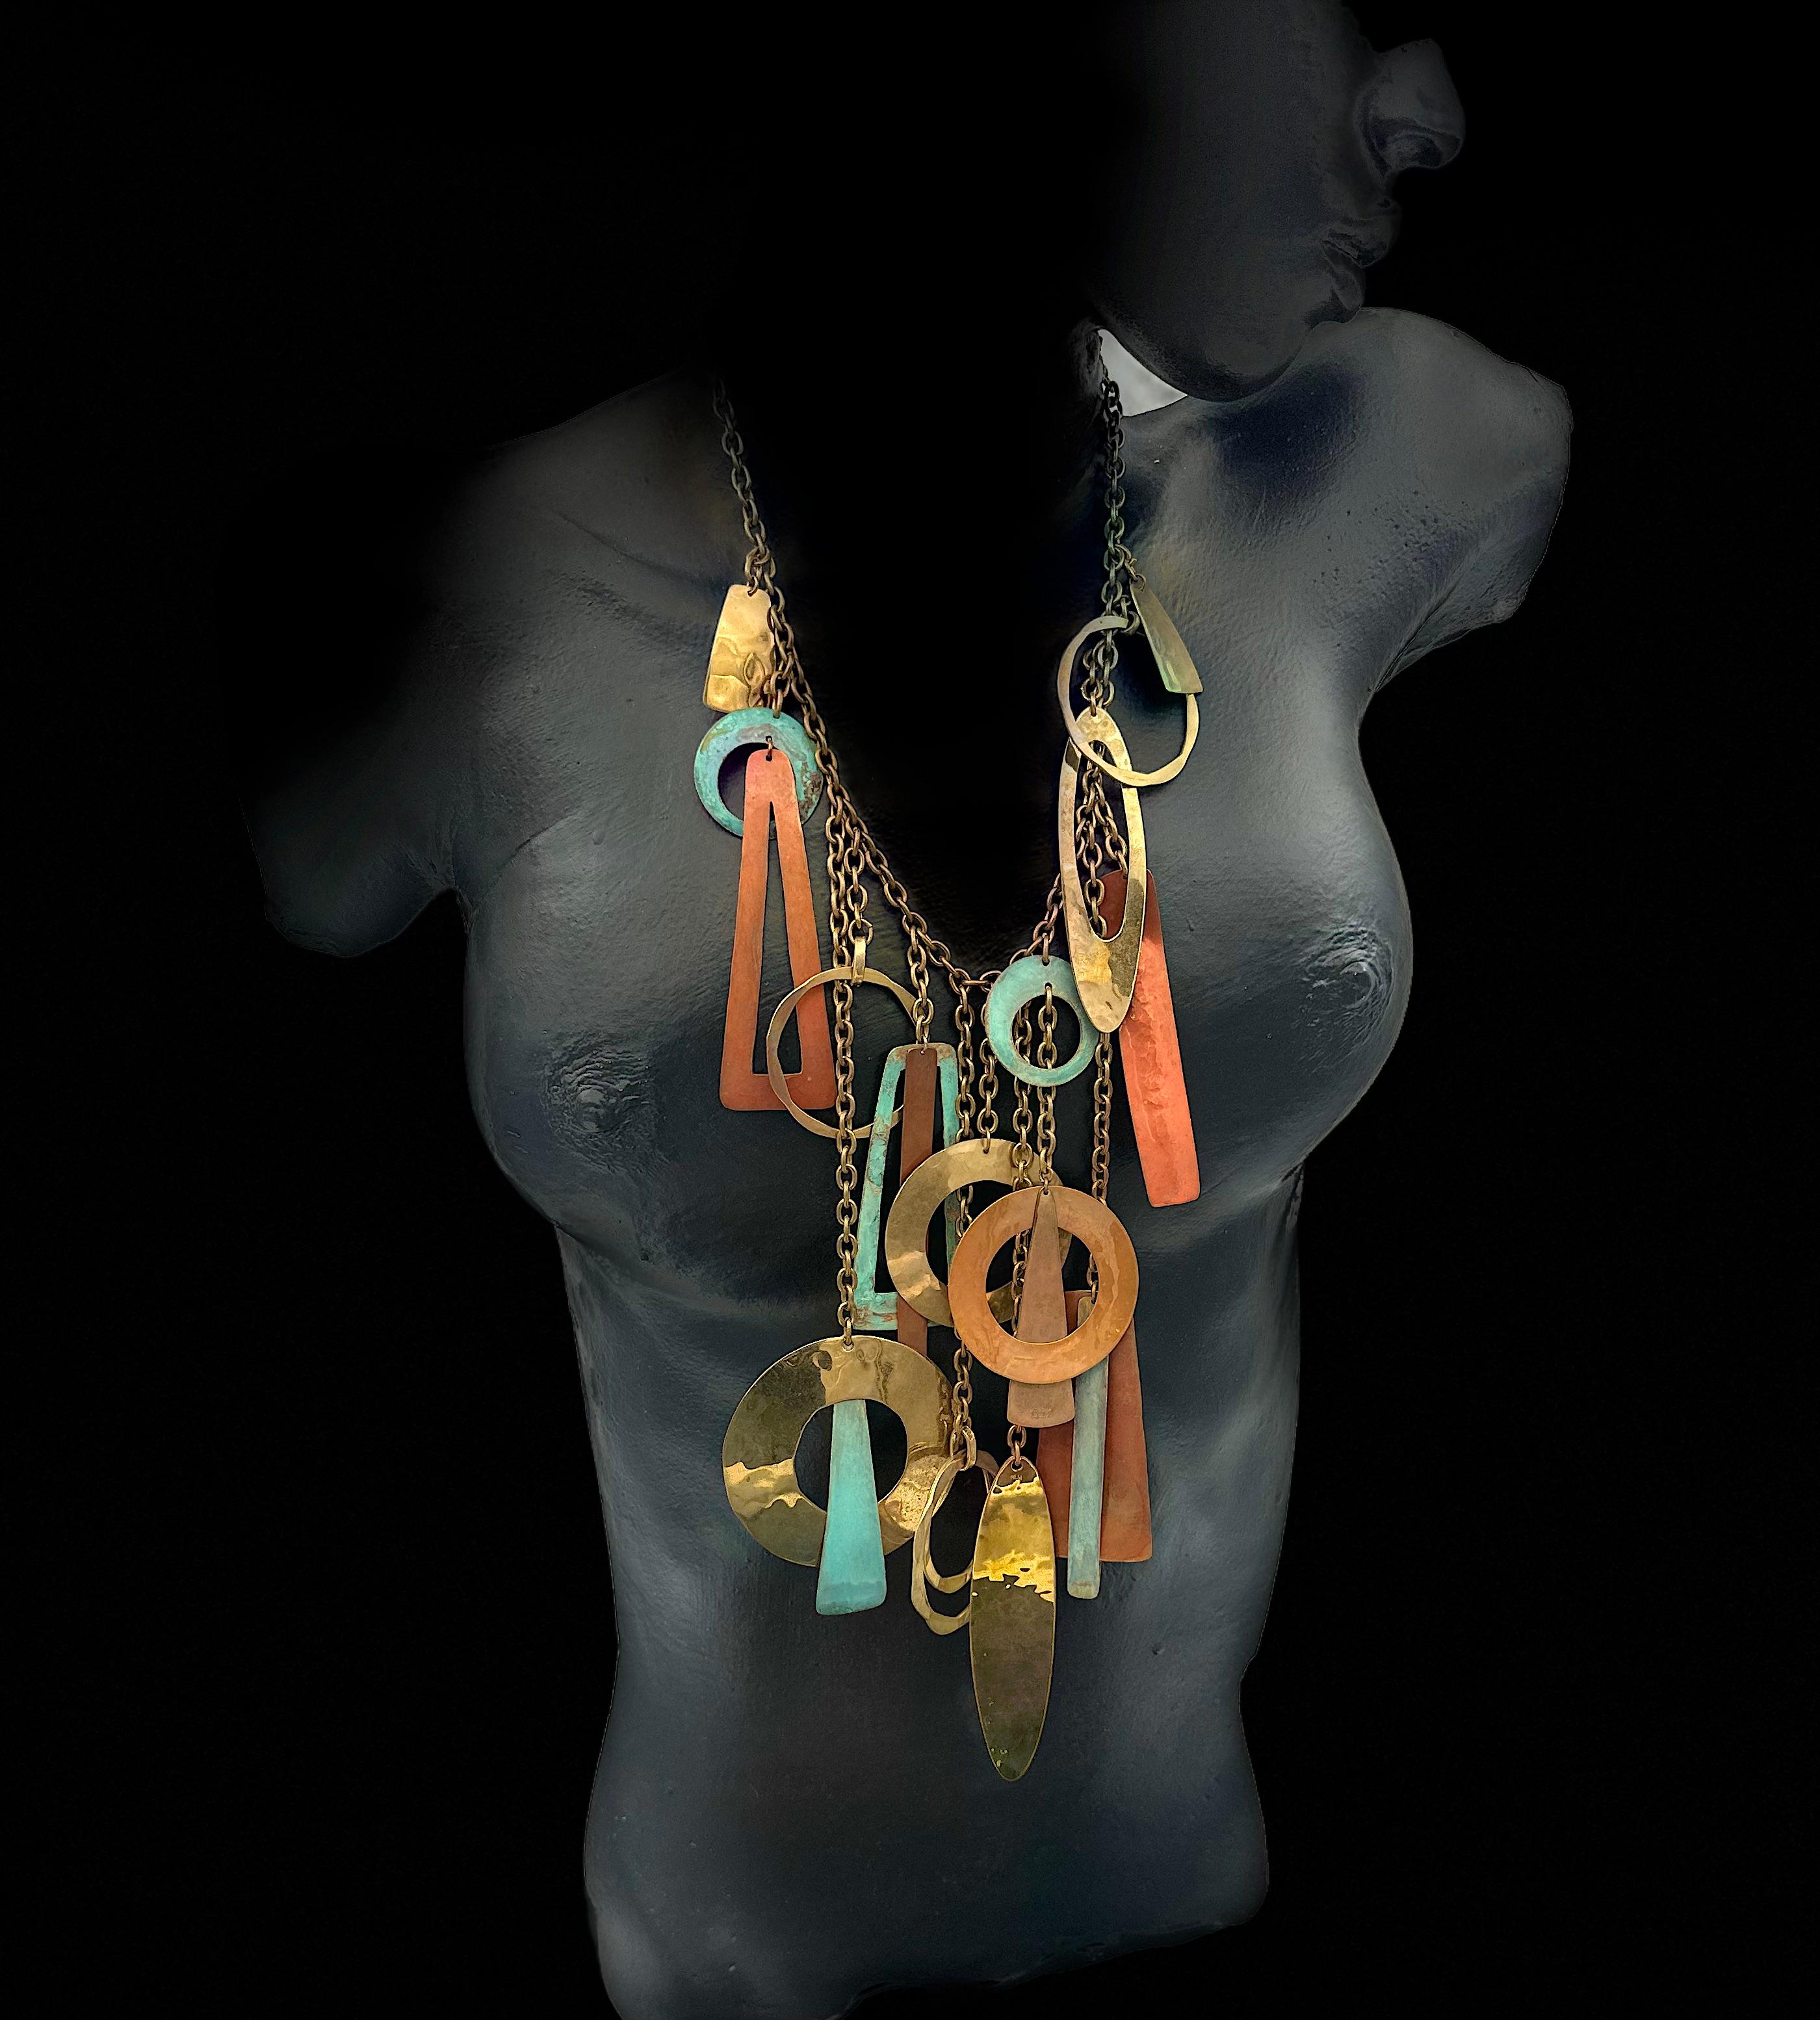 Robert Lee Morris is the designer who brought the rustic look of Wabi Sabi into his fashion jewelry and has helped to make it more mainstream. This one of a kind spectacular necklace is a symphony of colors and shapes hanging in a web of brass